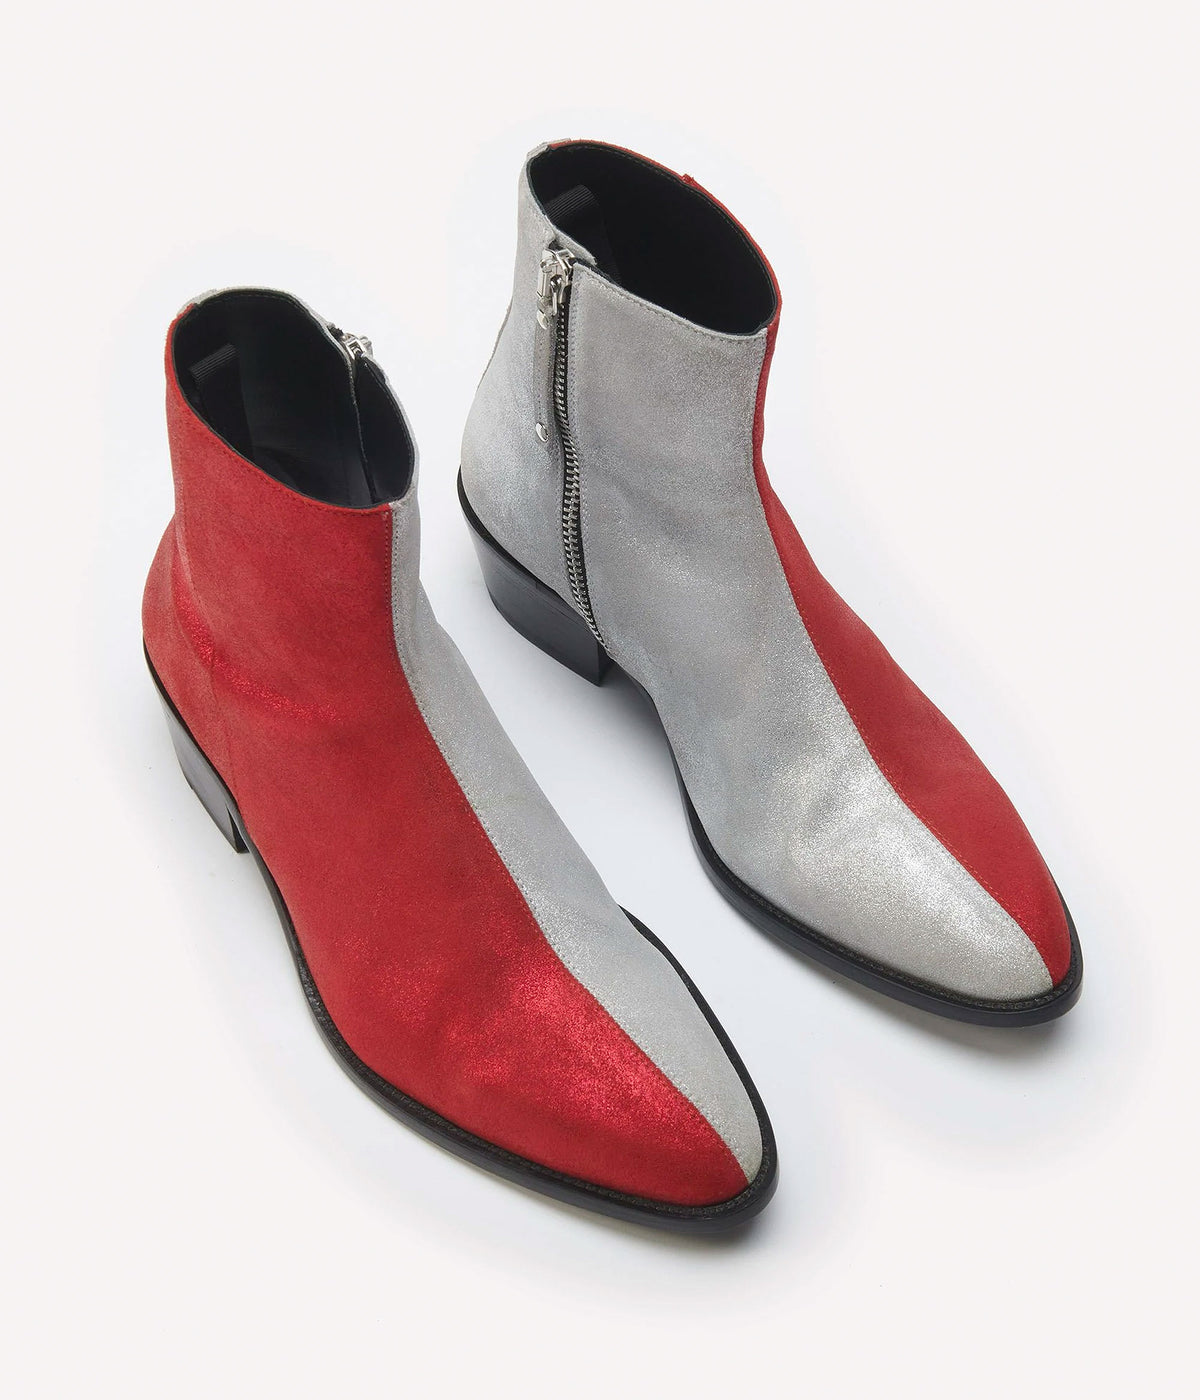 HUMAN RECREATIONAL SERVICES LUTHER BOOT IN RED AND GREY ITALIAN LEATHER